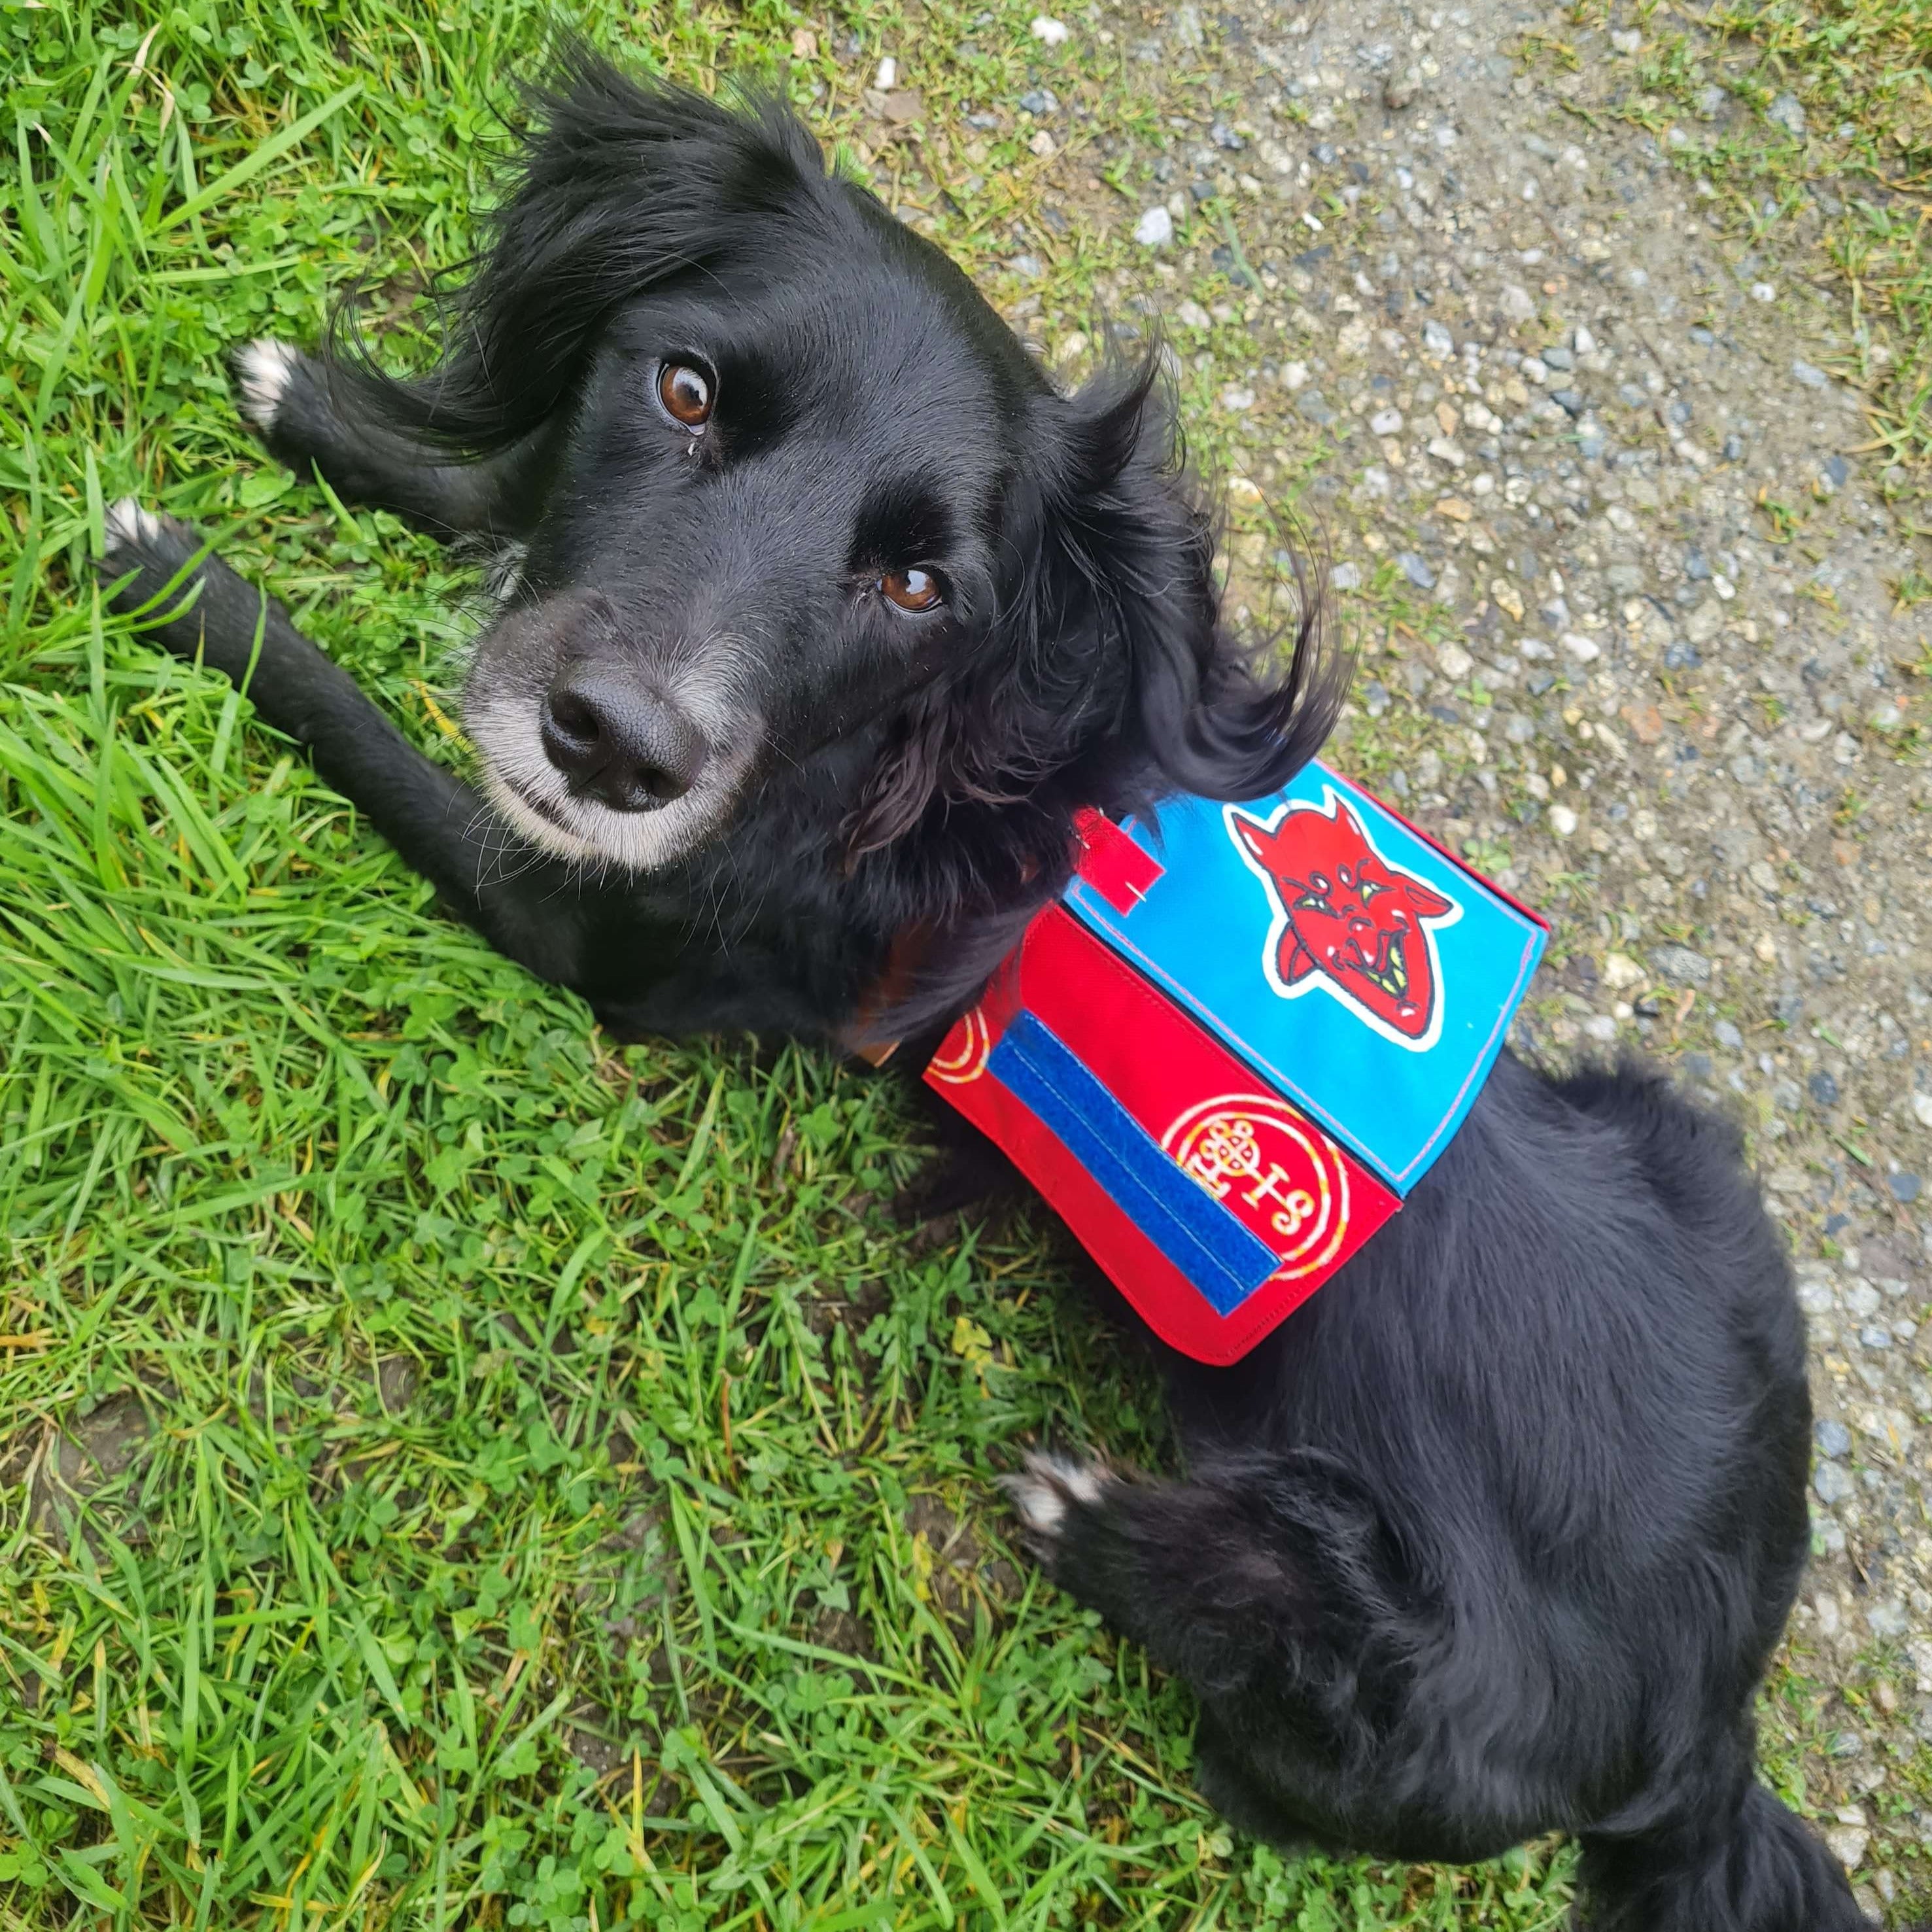 A mostly black border collie-spaniel mix lies halfway between grass and a stone chipping path, he is looking over his shoulder with alert eyes. He is wearing an assistance dog cape, sans labelling, with red side panels and a cyan back panel. On the back panel is an evil-looking red devil face with yellow eyes. On the side panel facing us there are demonic 'sigils' and a strip of royal blue loop-side velcro tape.